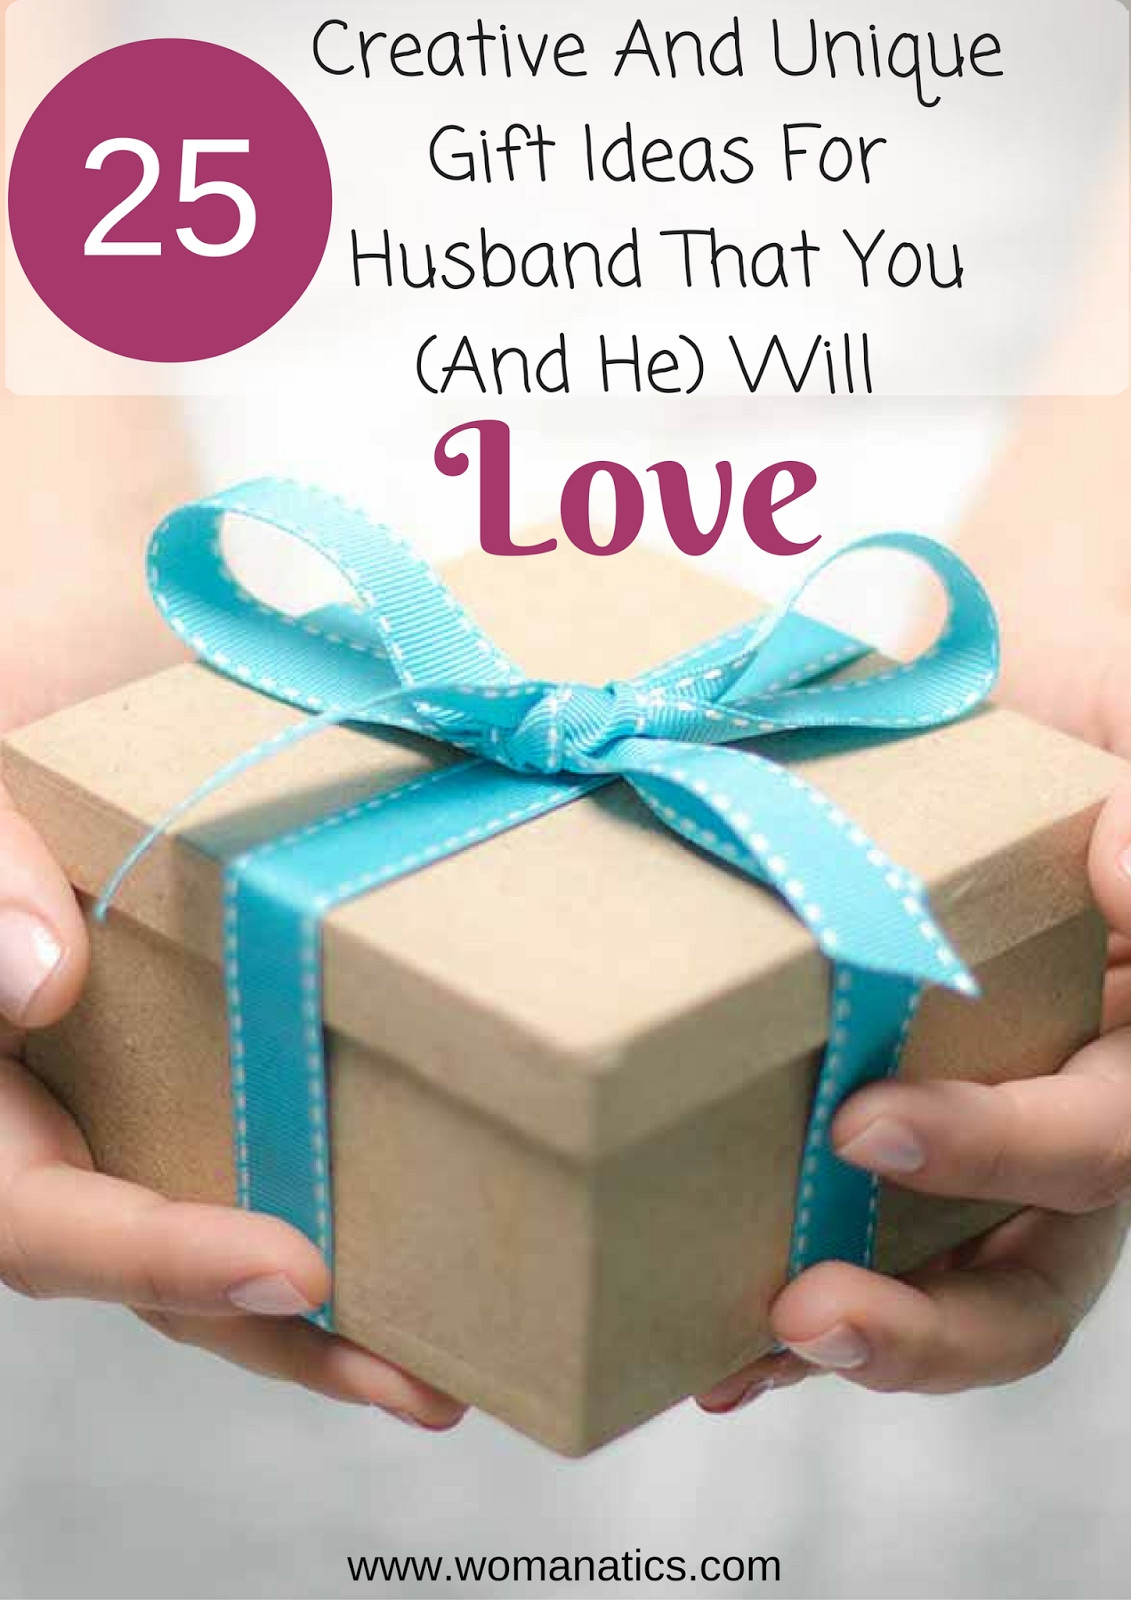 Creative Gift Ideas For Husband Birthday
 10 Attractive Bday Gift Ideas For Him 2020